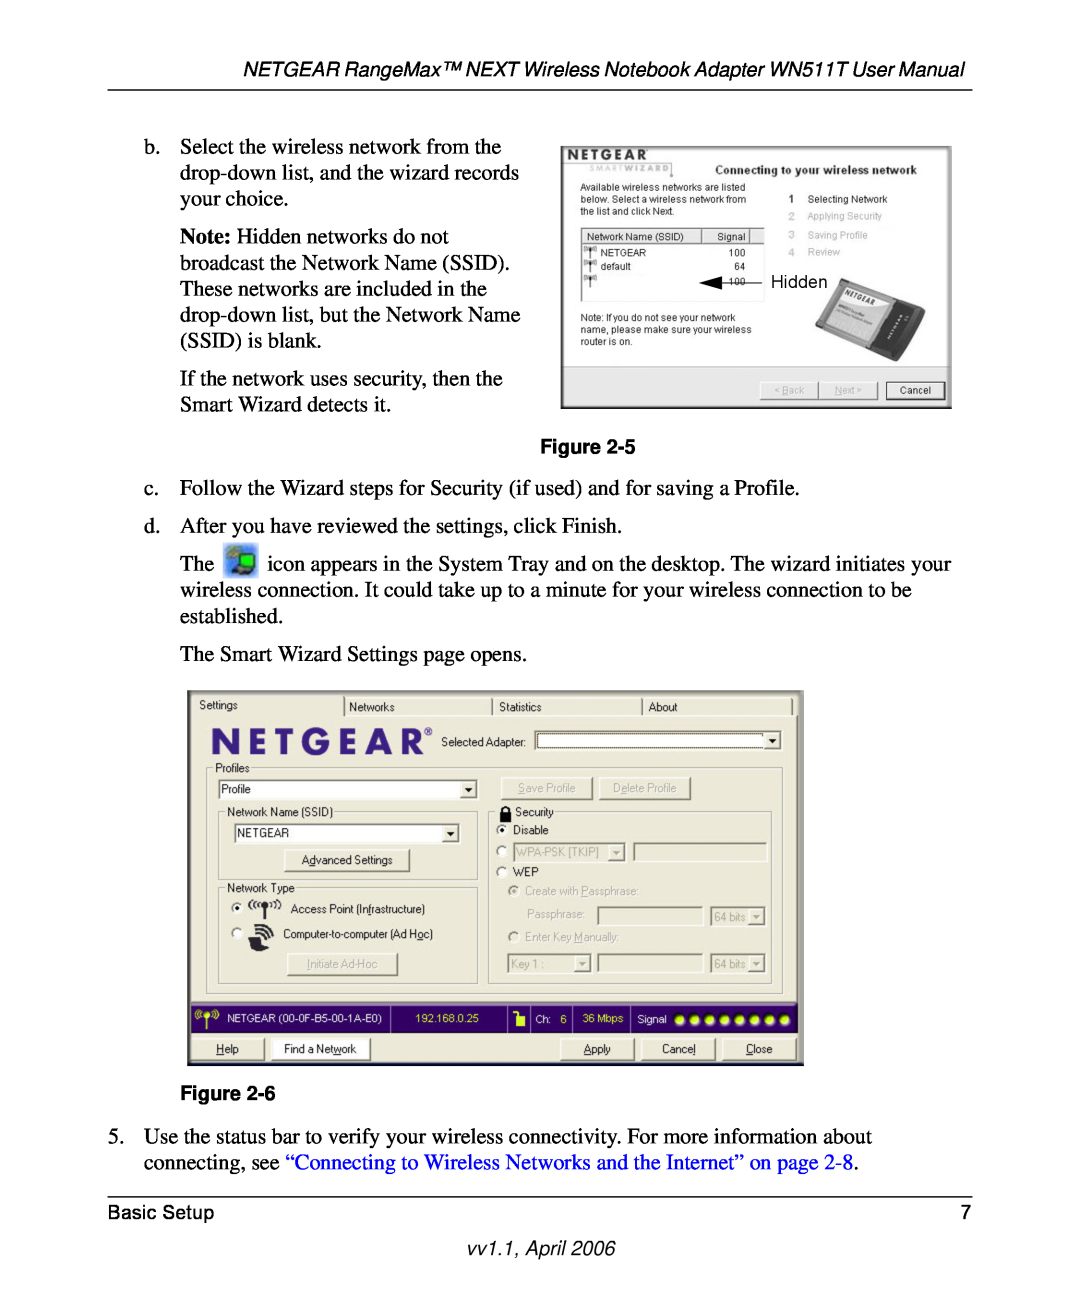 NETGEAR WN511T user manual Note Hidden networks do not broadcast the Network Name SSID 